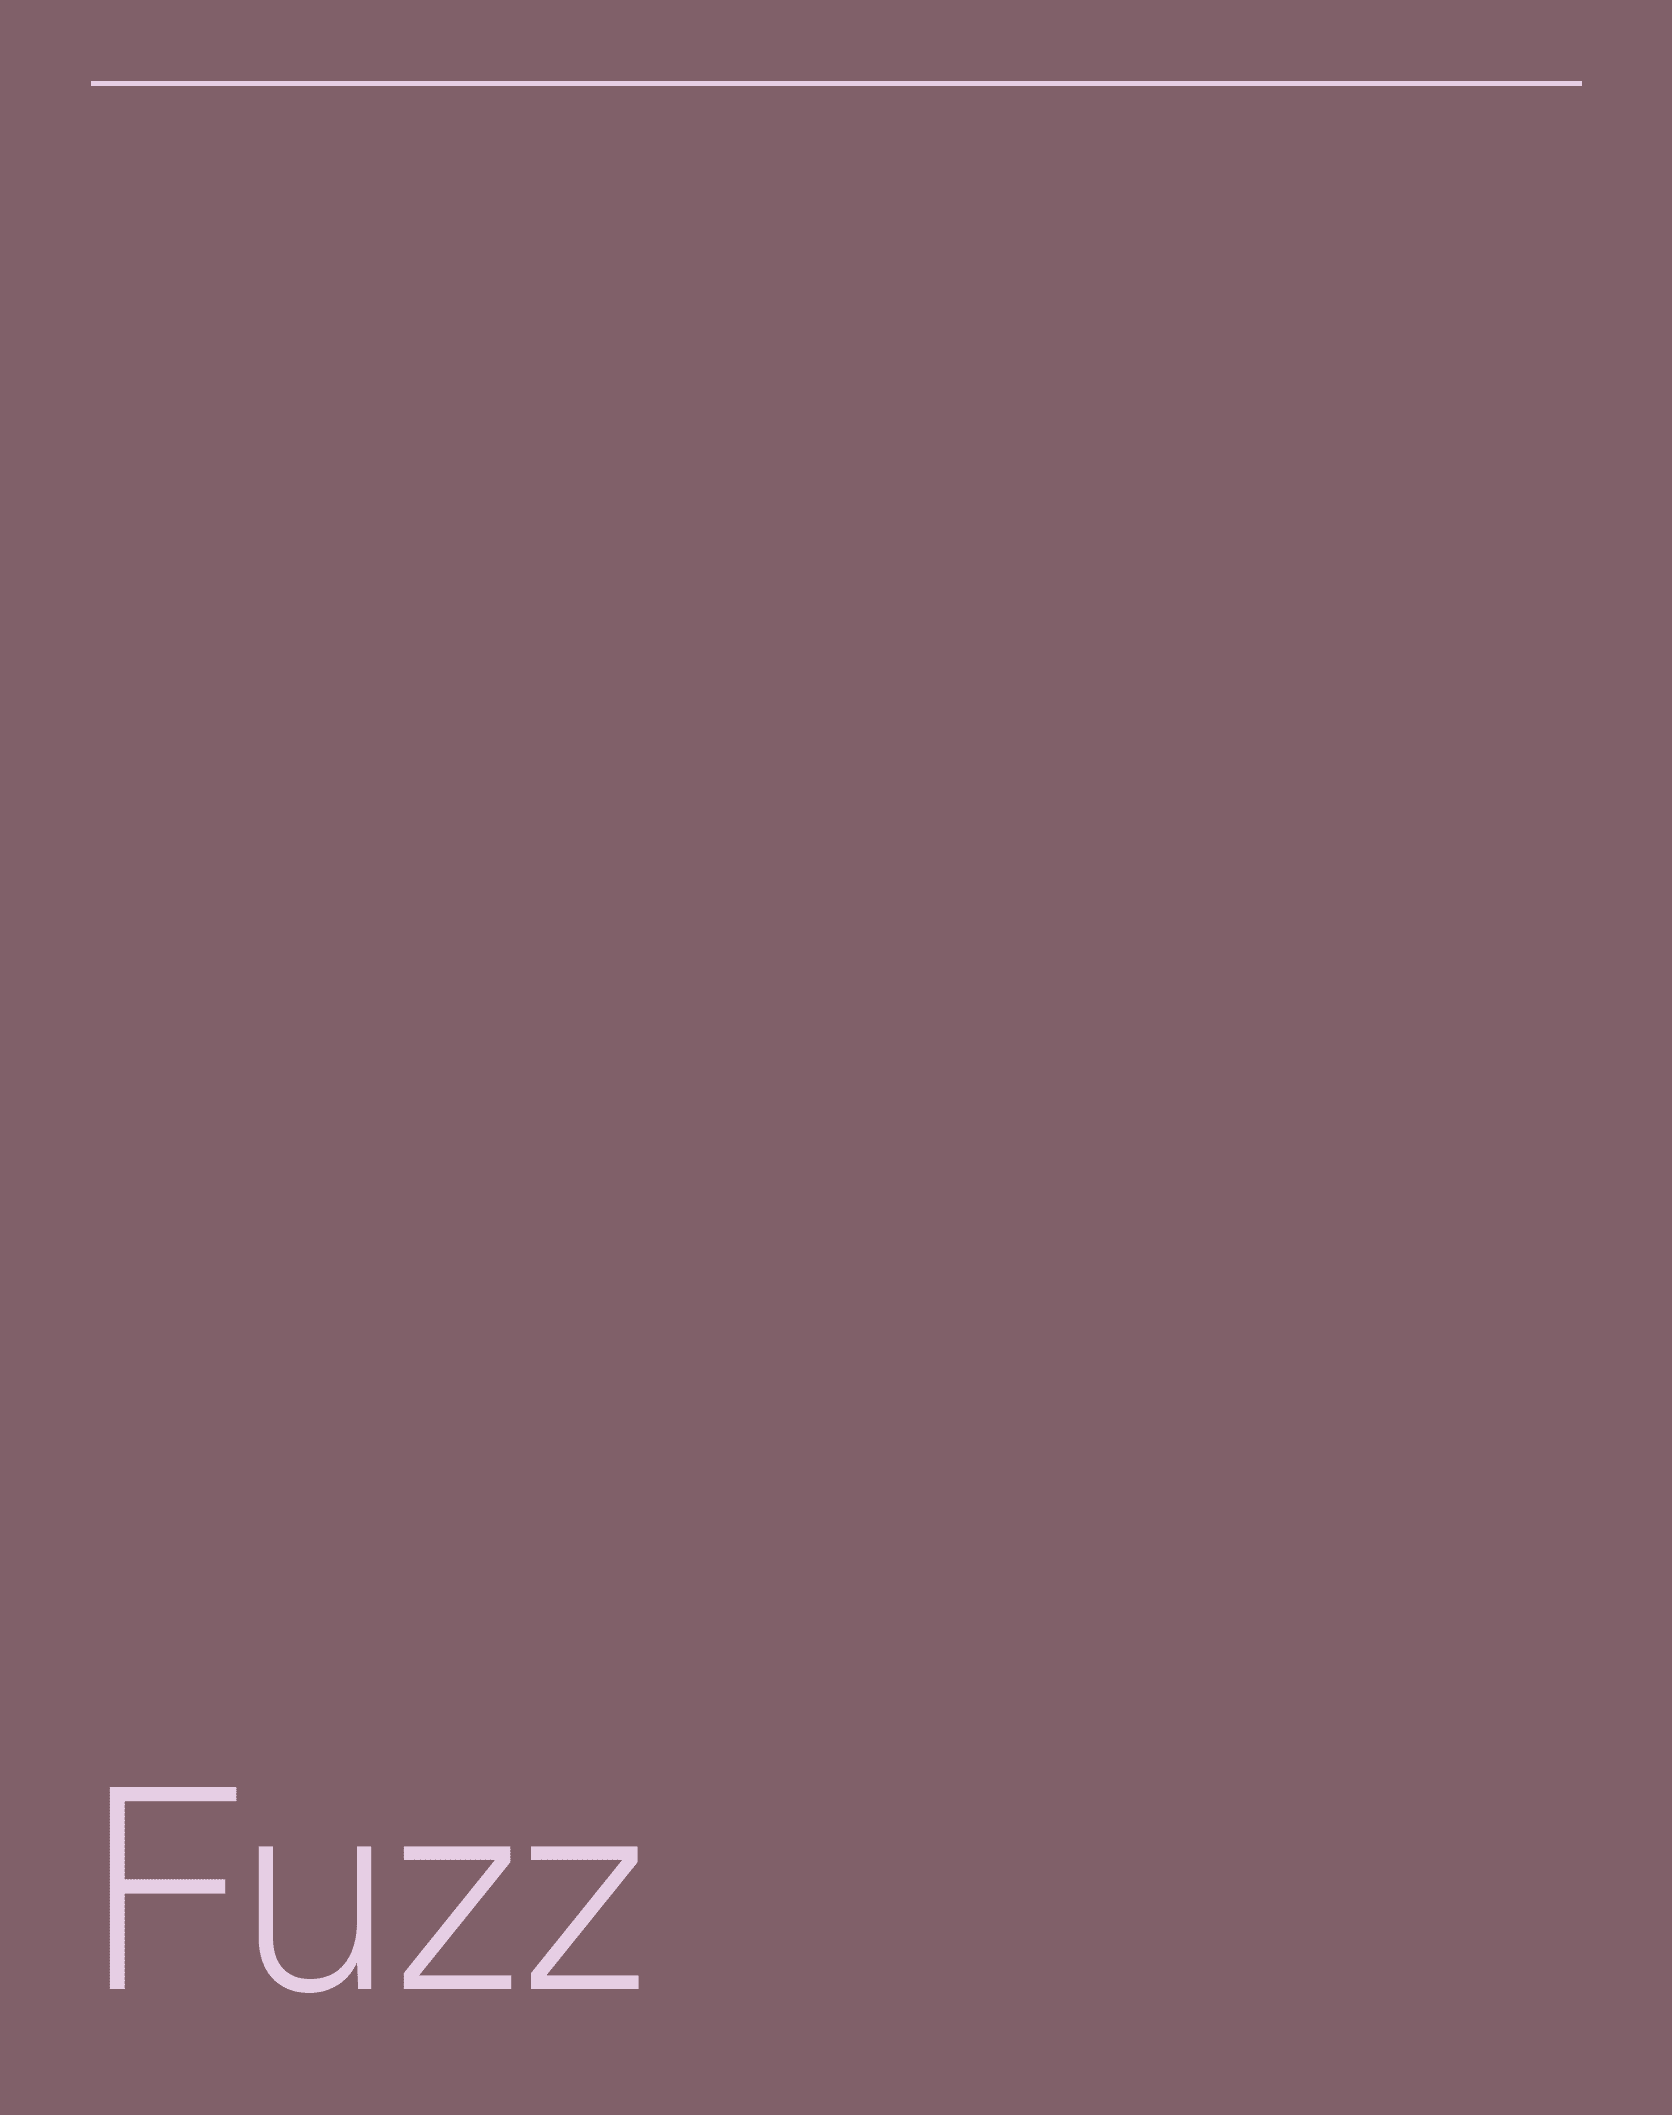 Fuzz creative brand image, Fuzz in light pink on deeper pink background